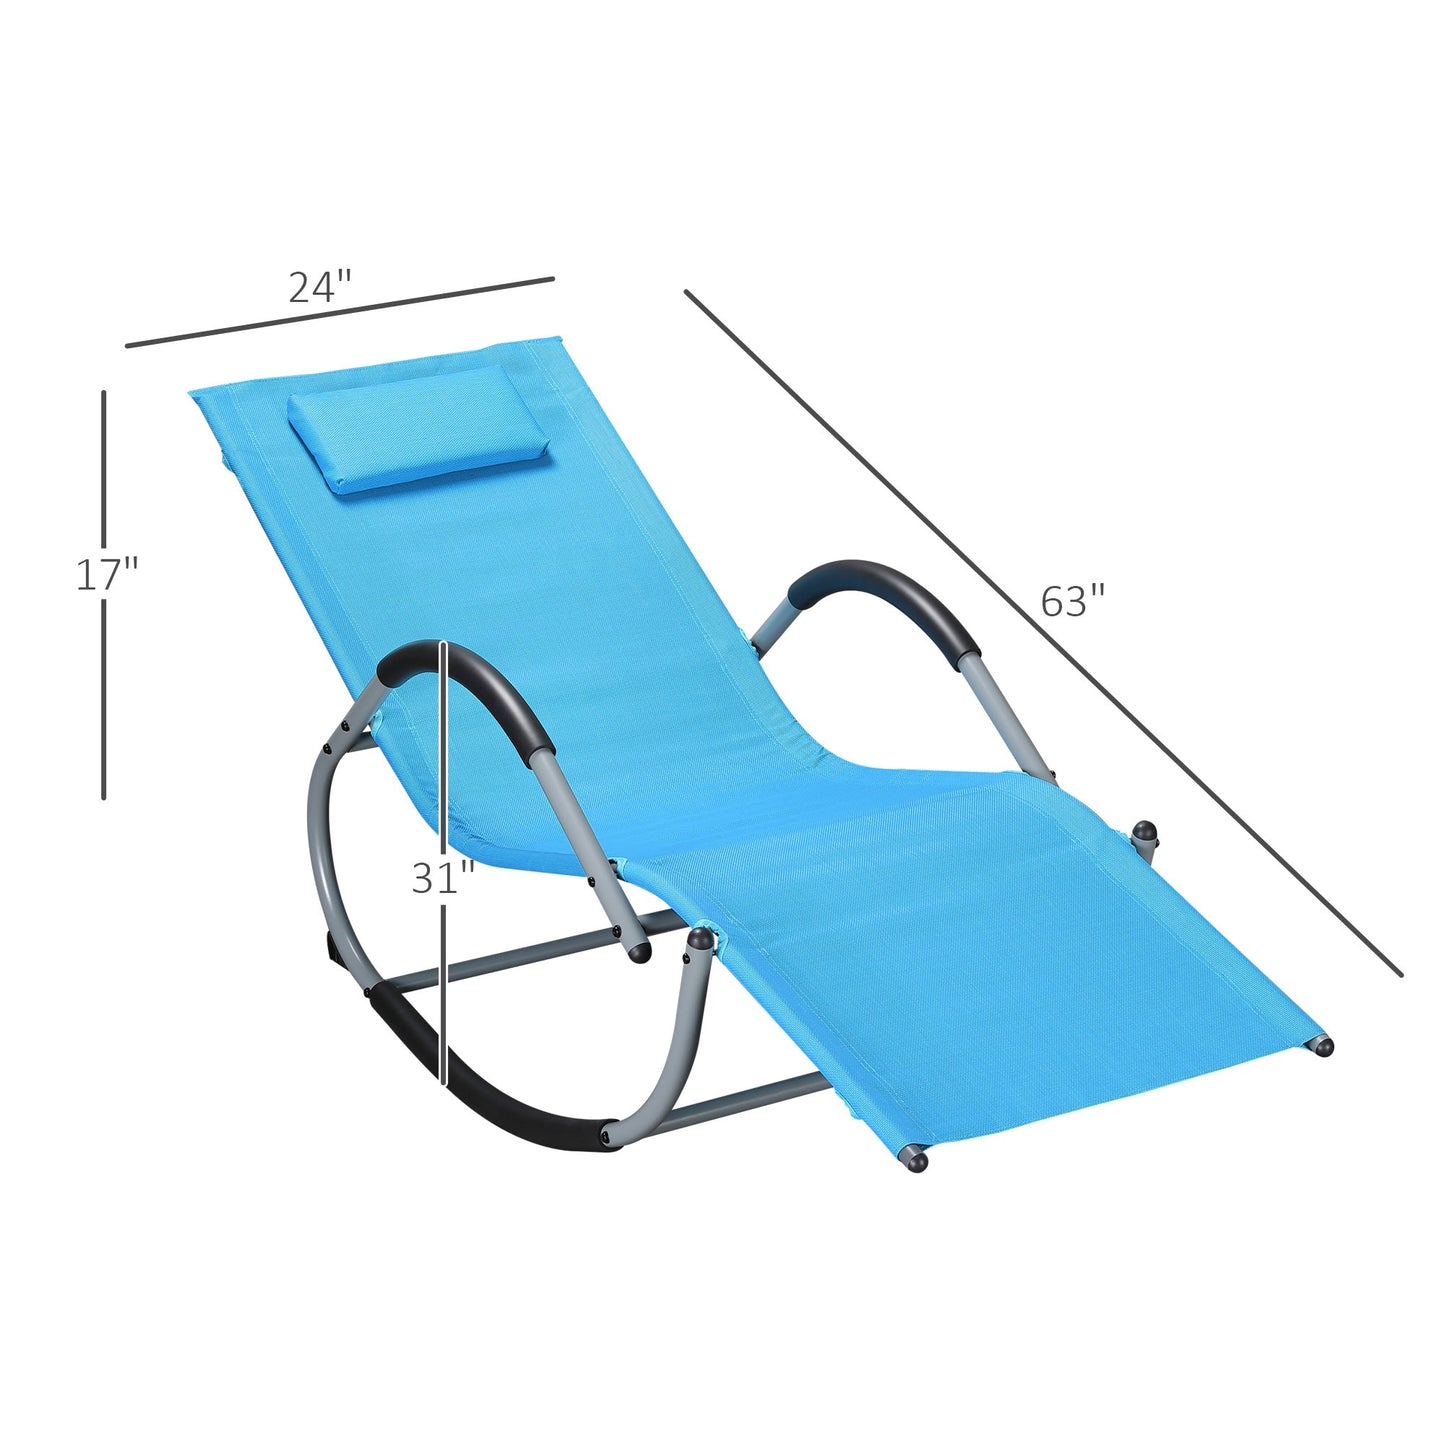 Outdoor and Garden-Rocking Chair, Zero Gravity Patio Chaise Sun Lounger, Outdoor Rocker, UV Water Resistant with Pillow, for Lawn, Garden or Pool - Sky Blue - Outdoor Style Company